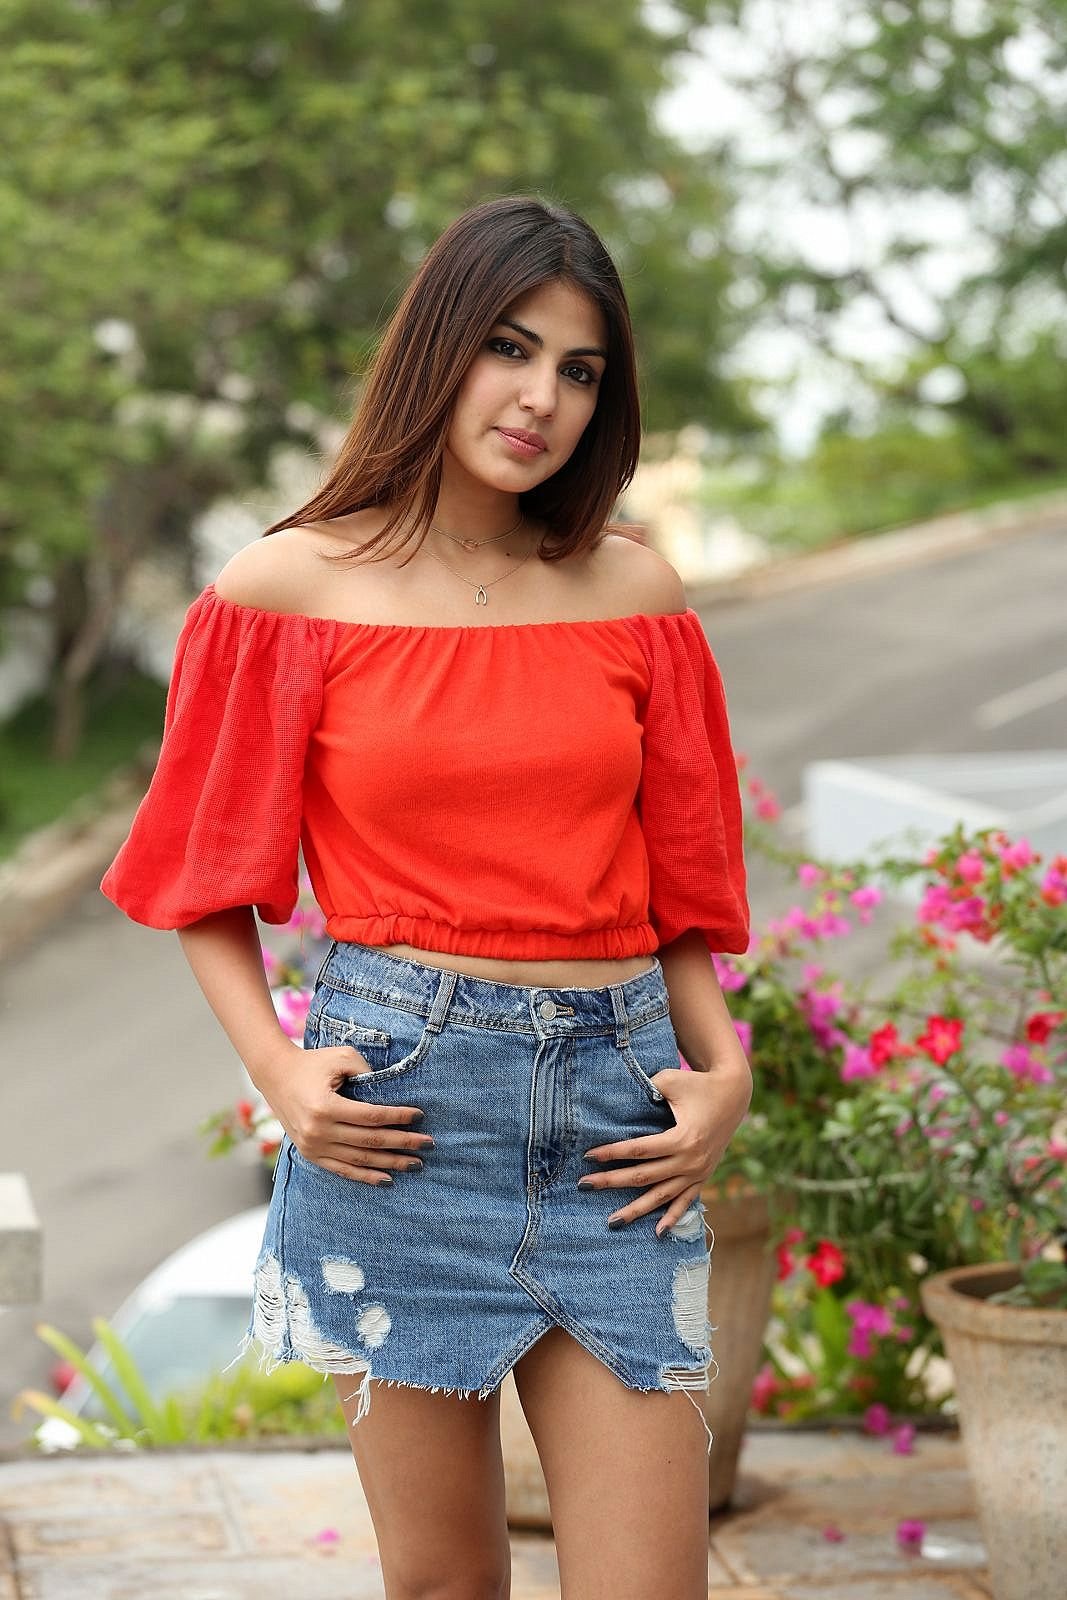 Rhea Chakraborty Displays Her Sexy Legs and Toned Midriff in Her Latest Hot Photo shoot